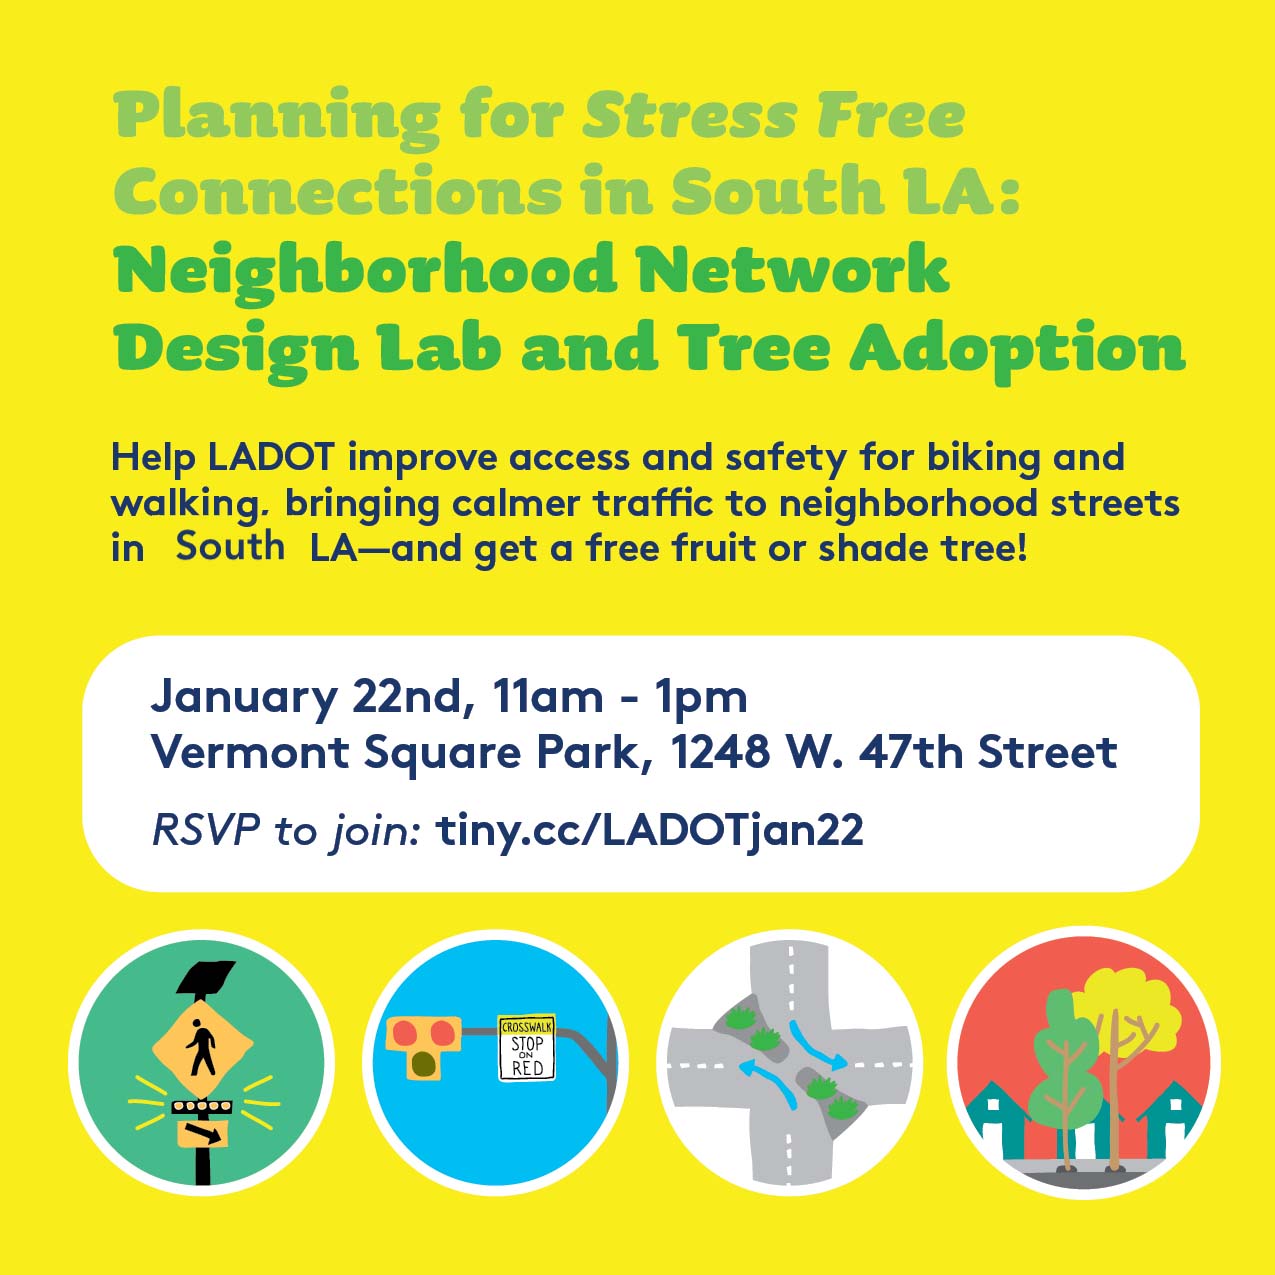 Planning for Stress-Free Connections in South LA: Neighborhood Network Design Lab and Tree Adoption